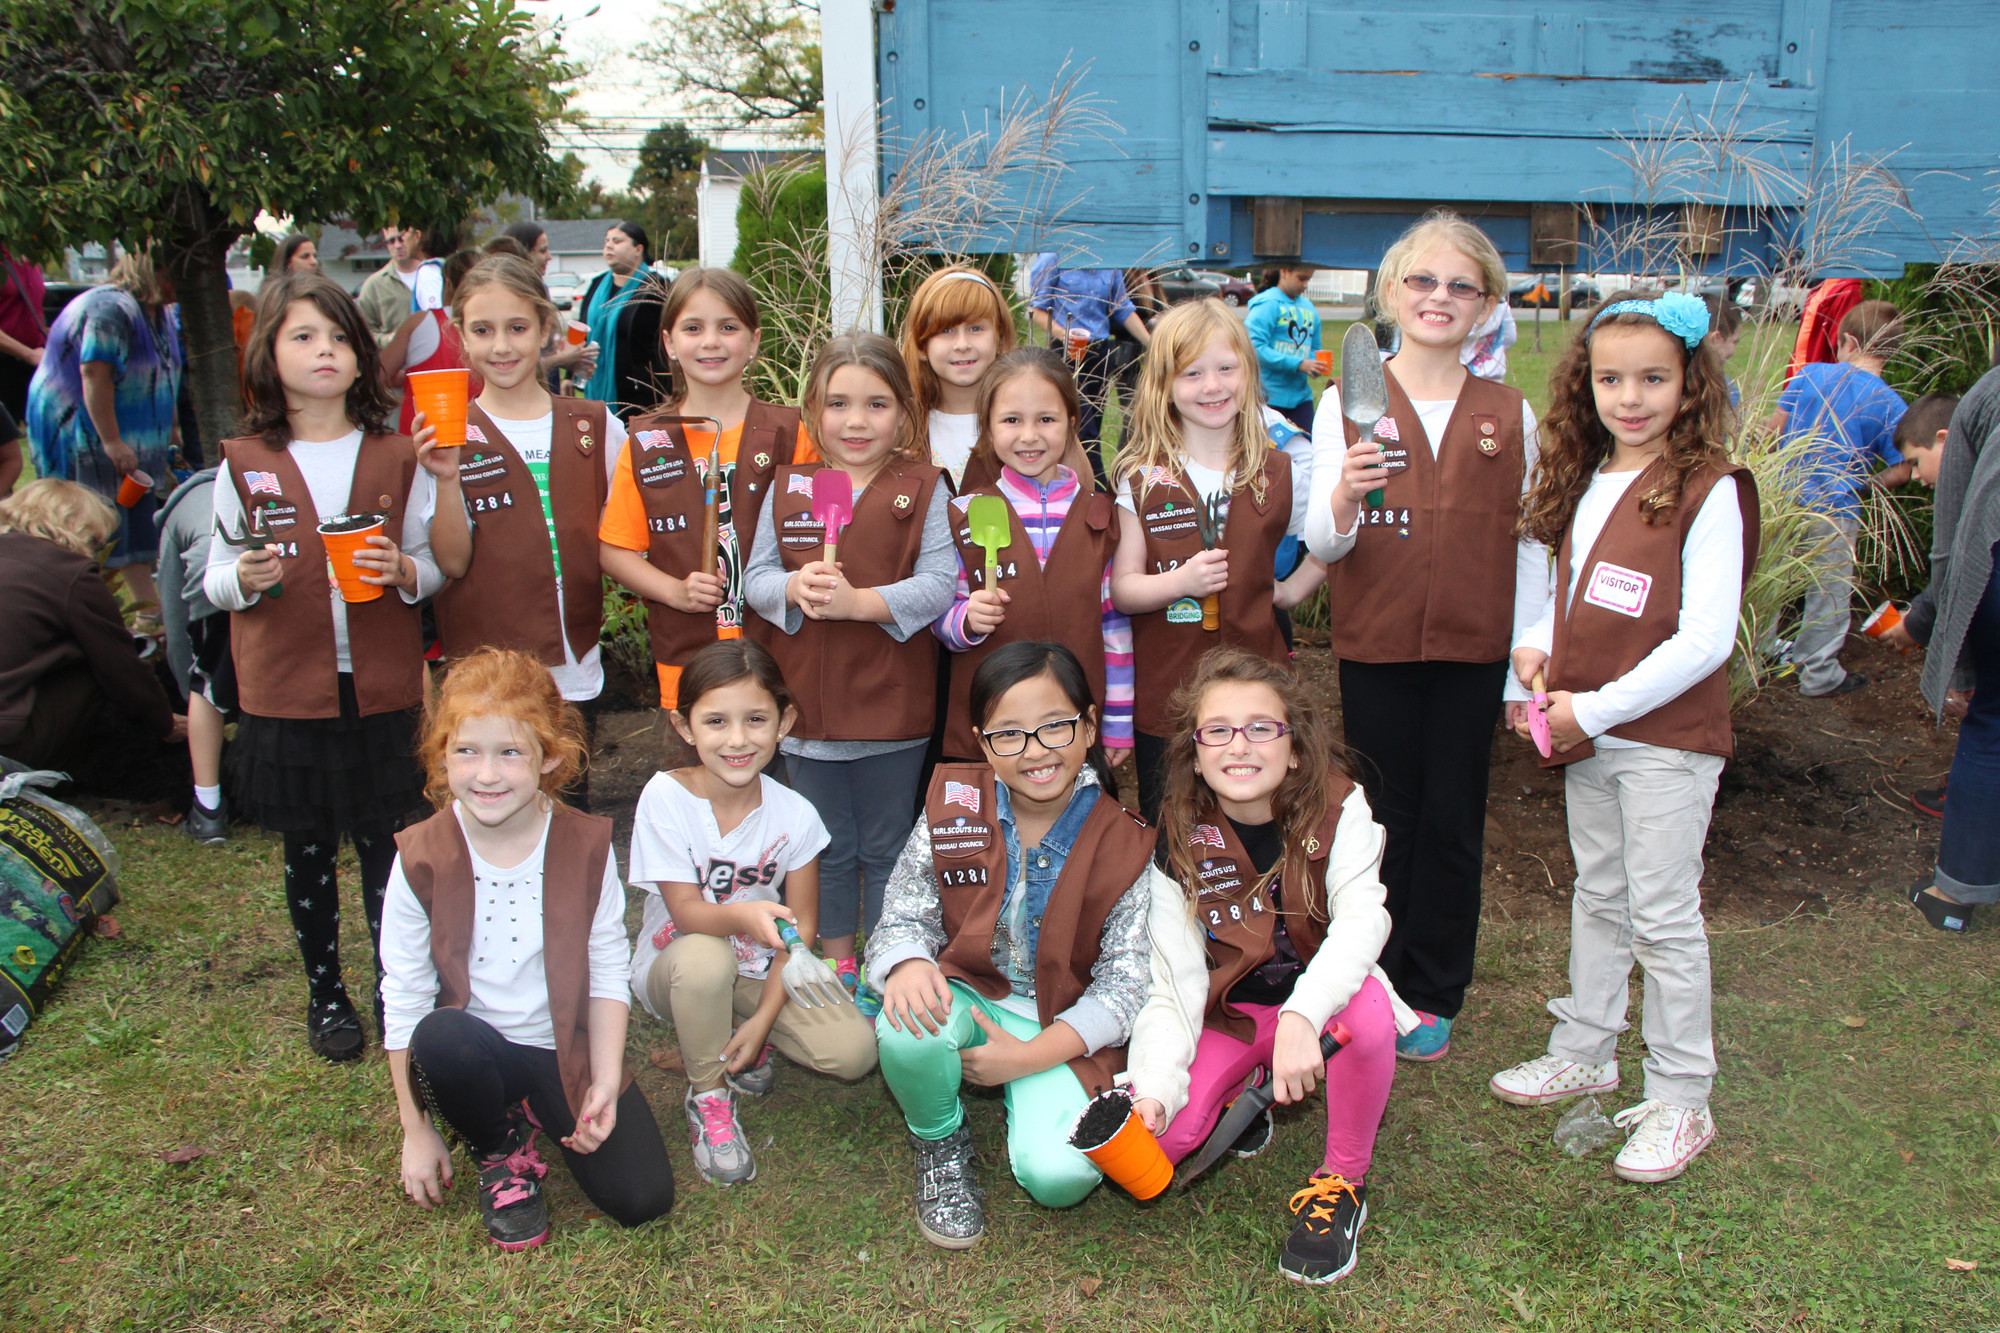 Brownie Troop 1284, who are all second and third graders at Bowling Green, was one of many local scout troops who participated in the planting event.